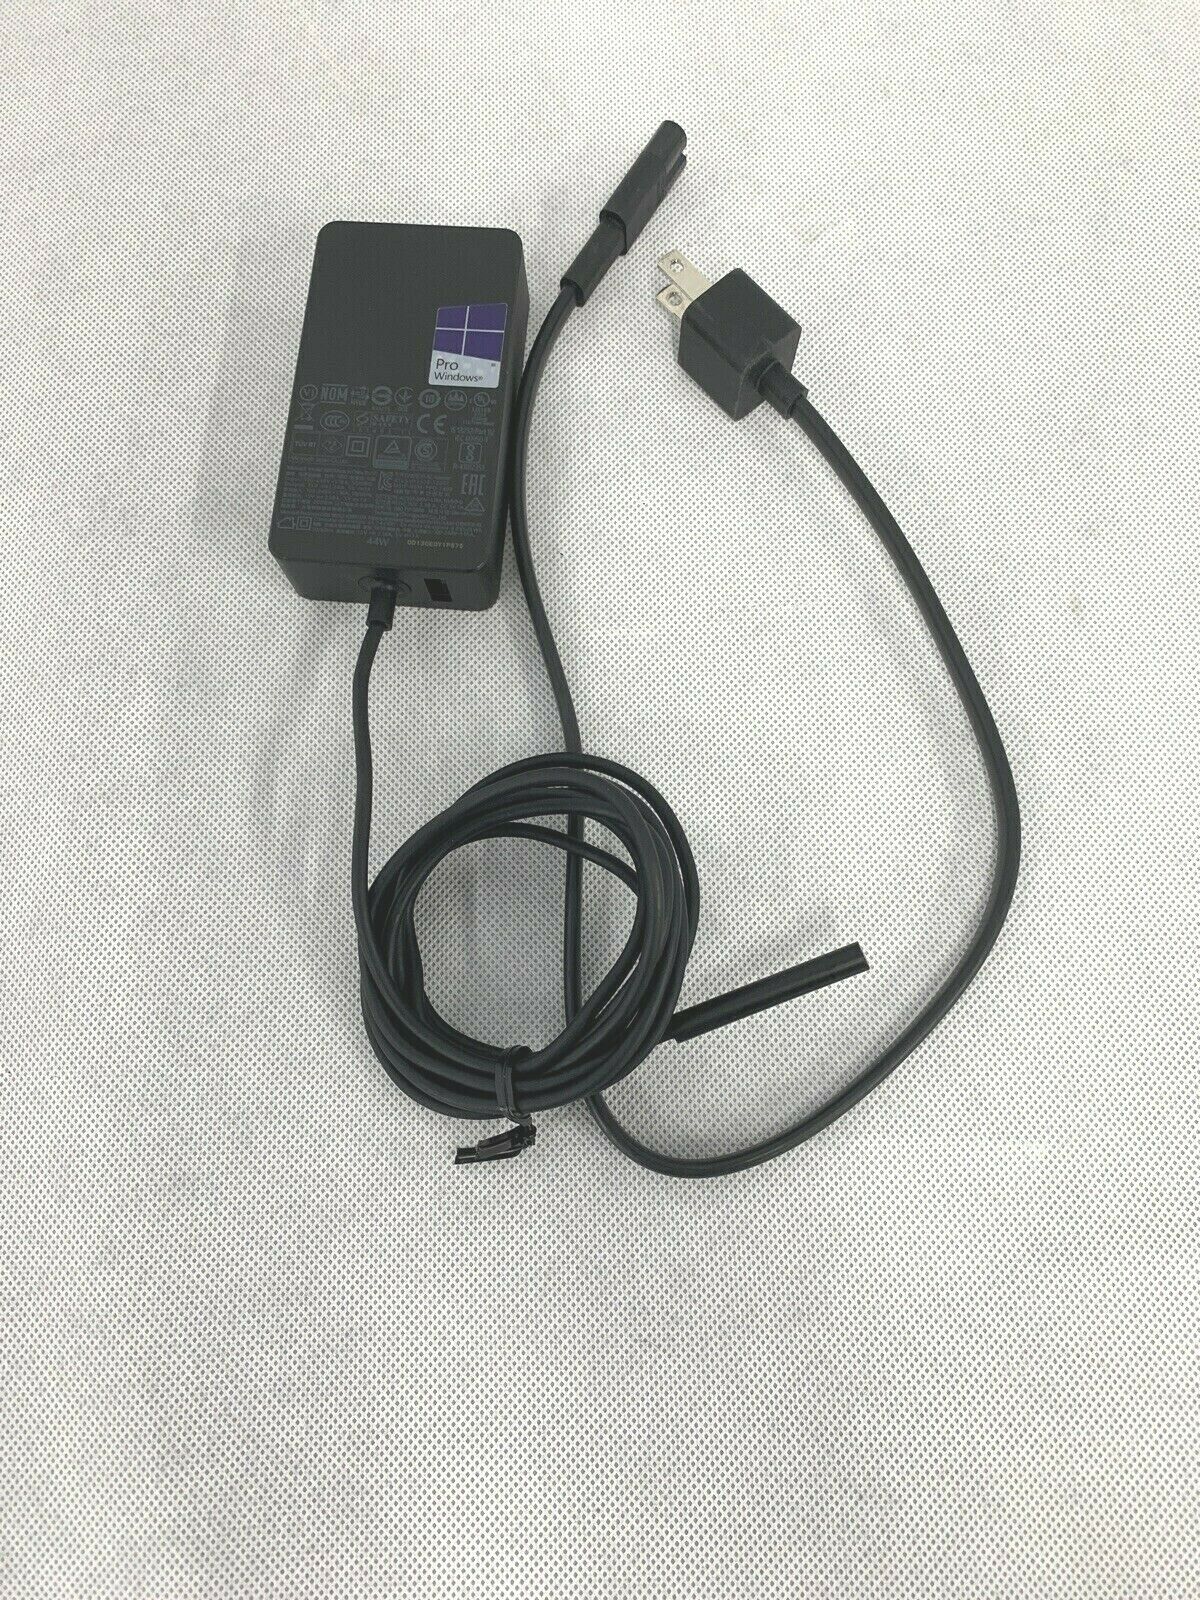 Genuine Microsoft Surface Pro 3 4 5 6 Charger Model 1800 15V 44W Compatible Brand: For Microsoft Type: AC/Standard